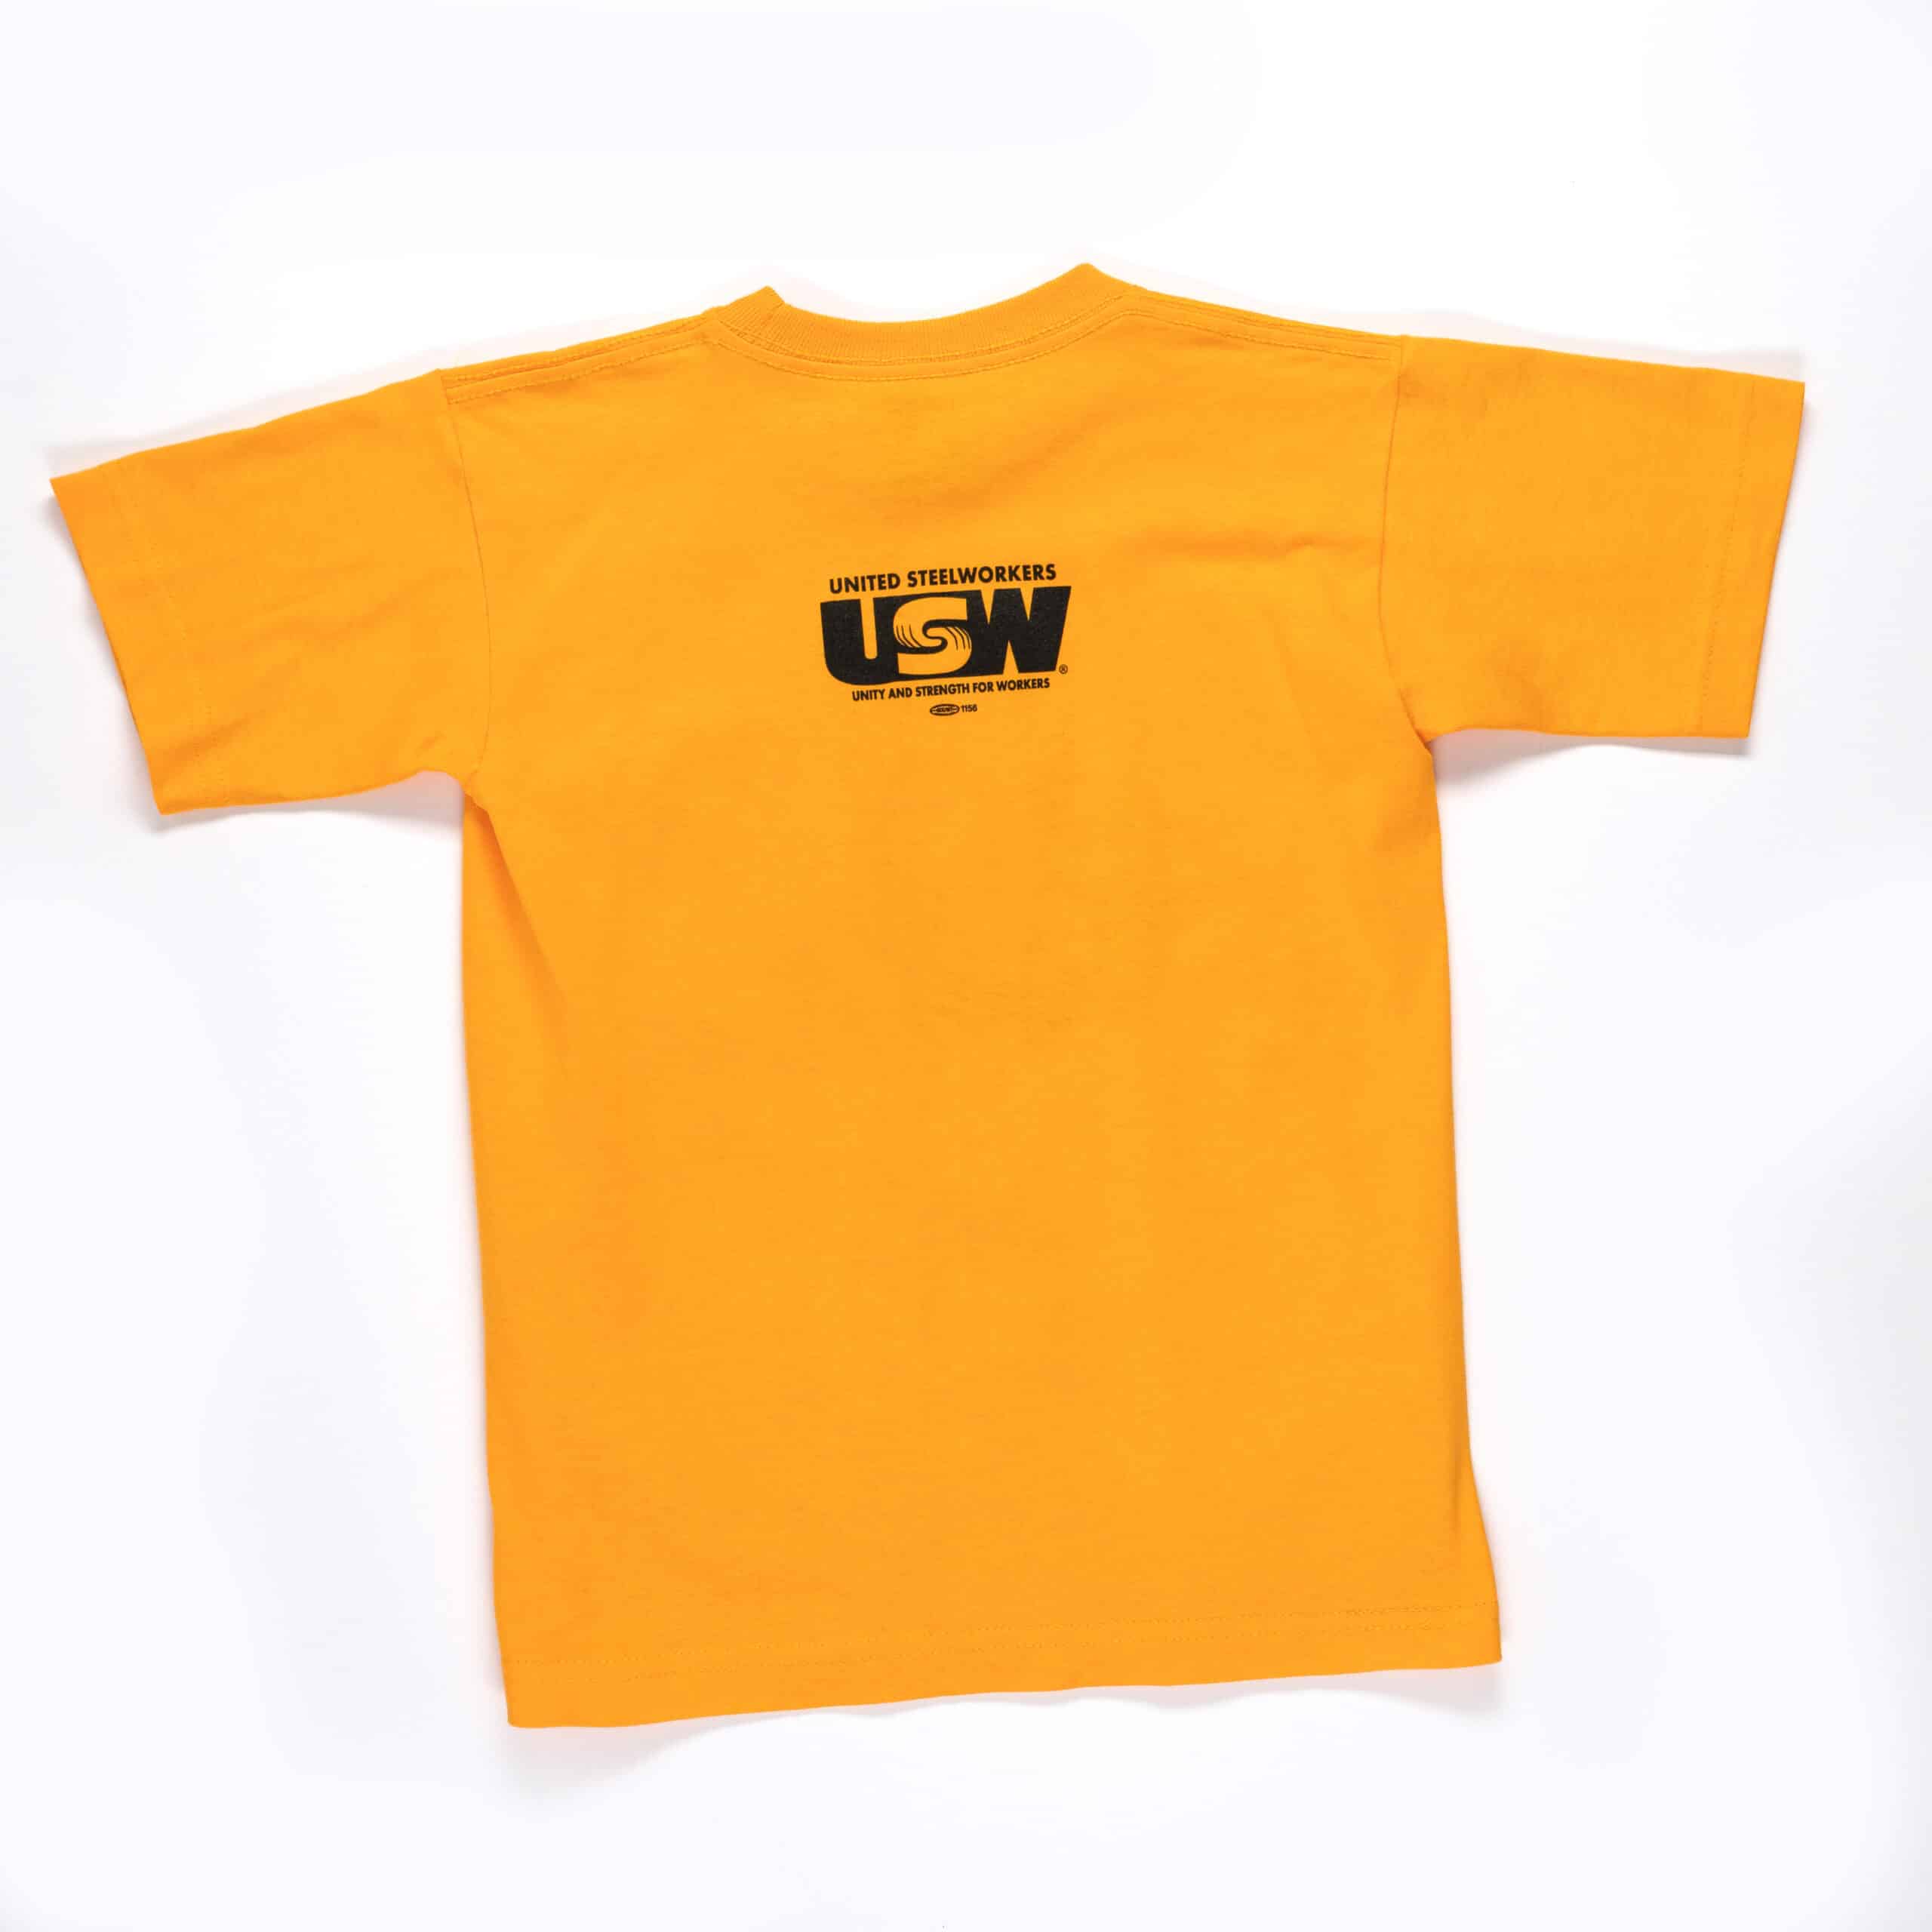 Children's Apparel Archives - USW Steelworker Store